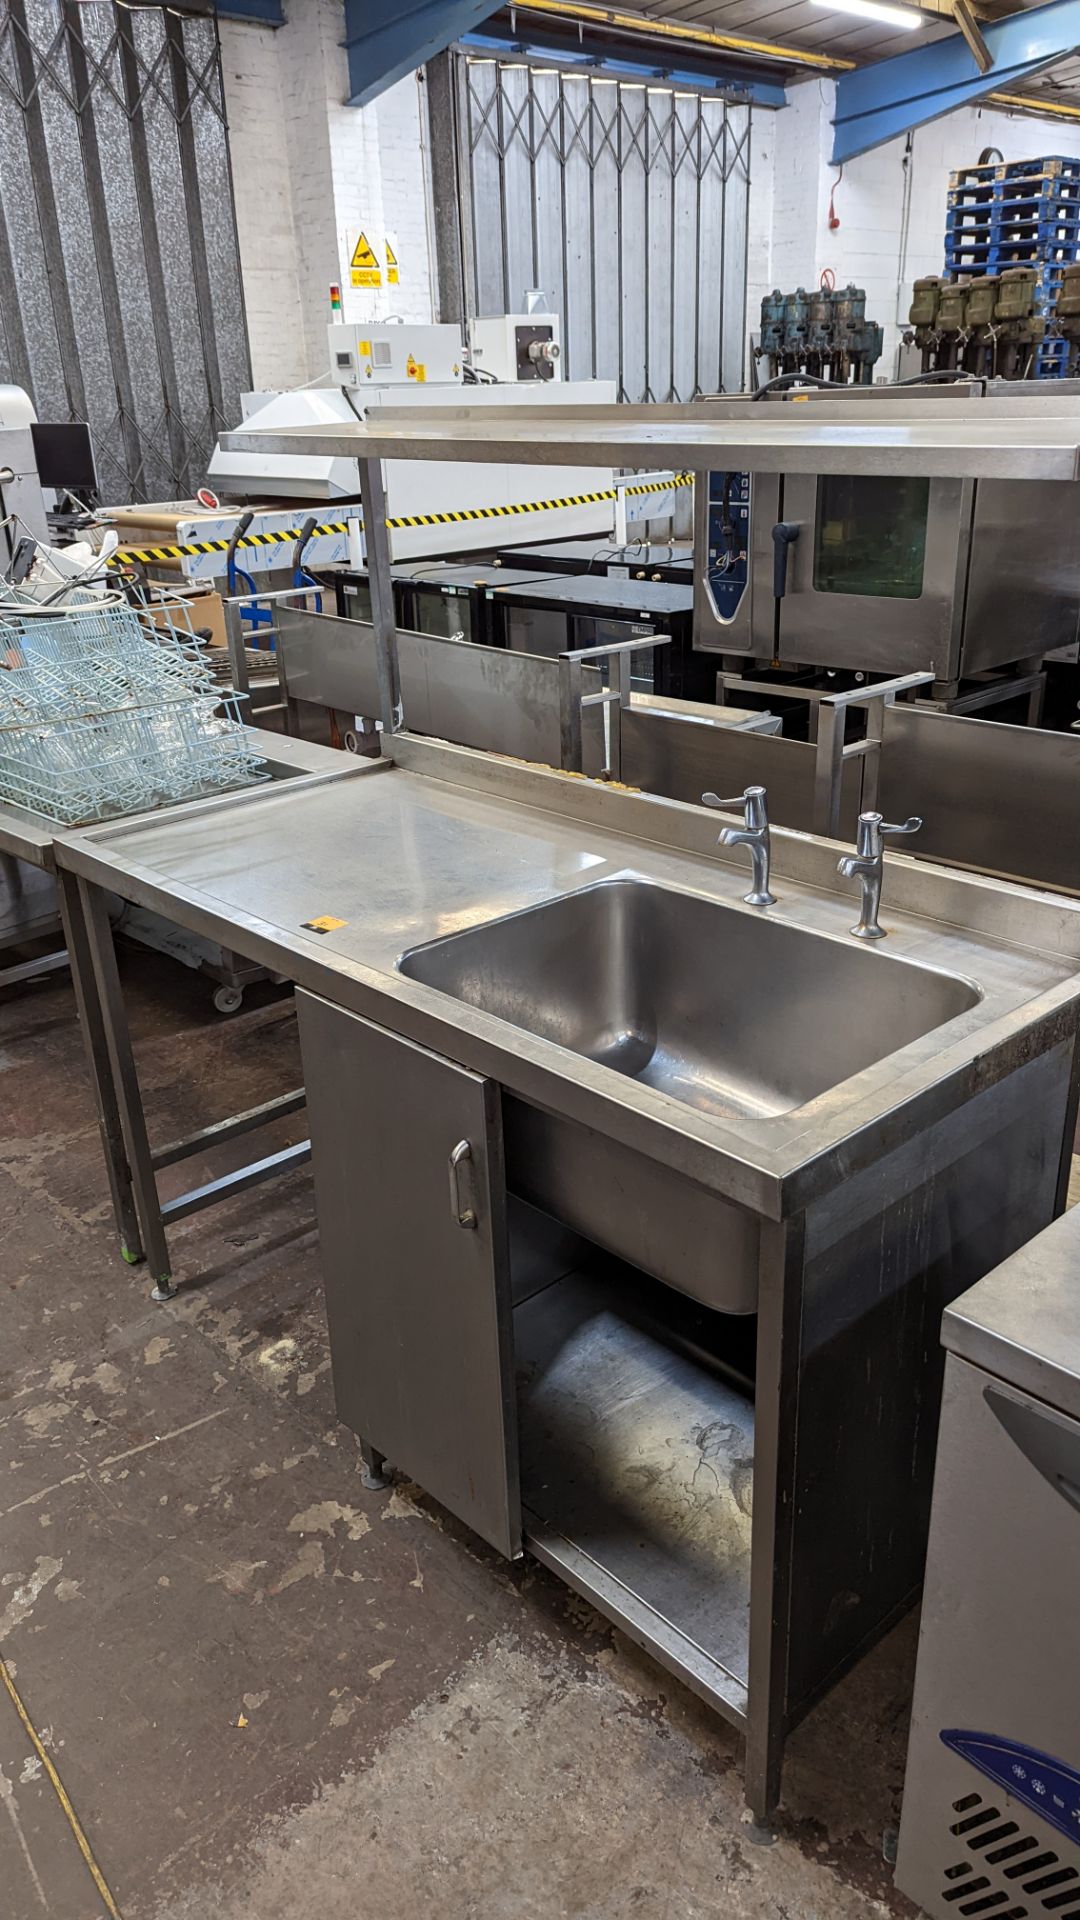 Stainless steel freestanding single bowl sink with large drainer, shelf above & storage below